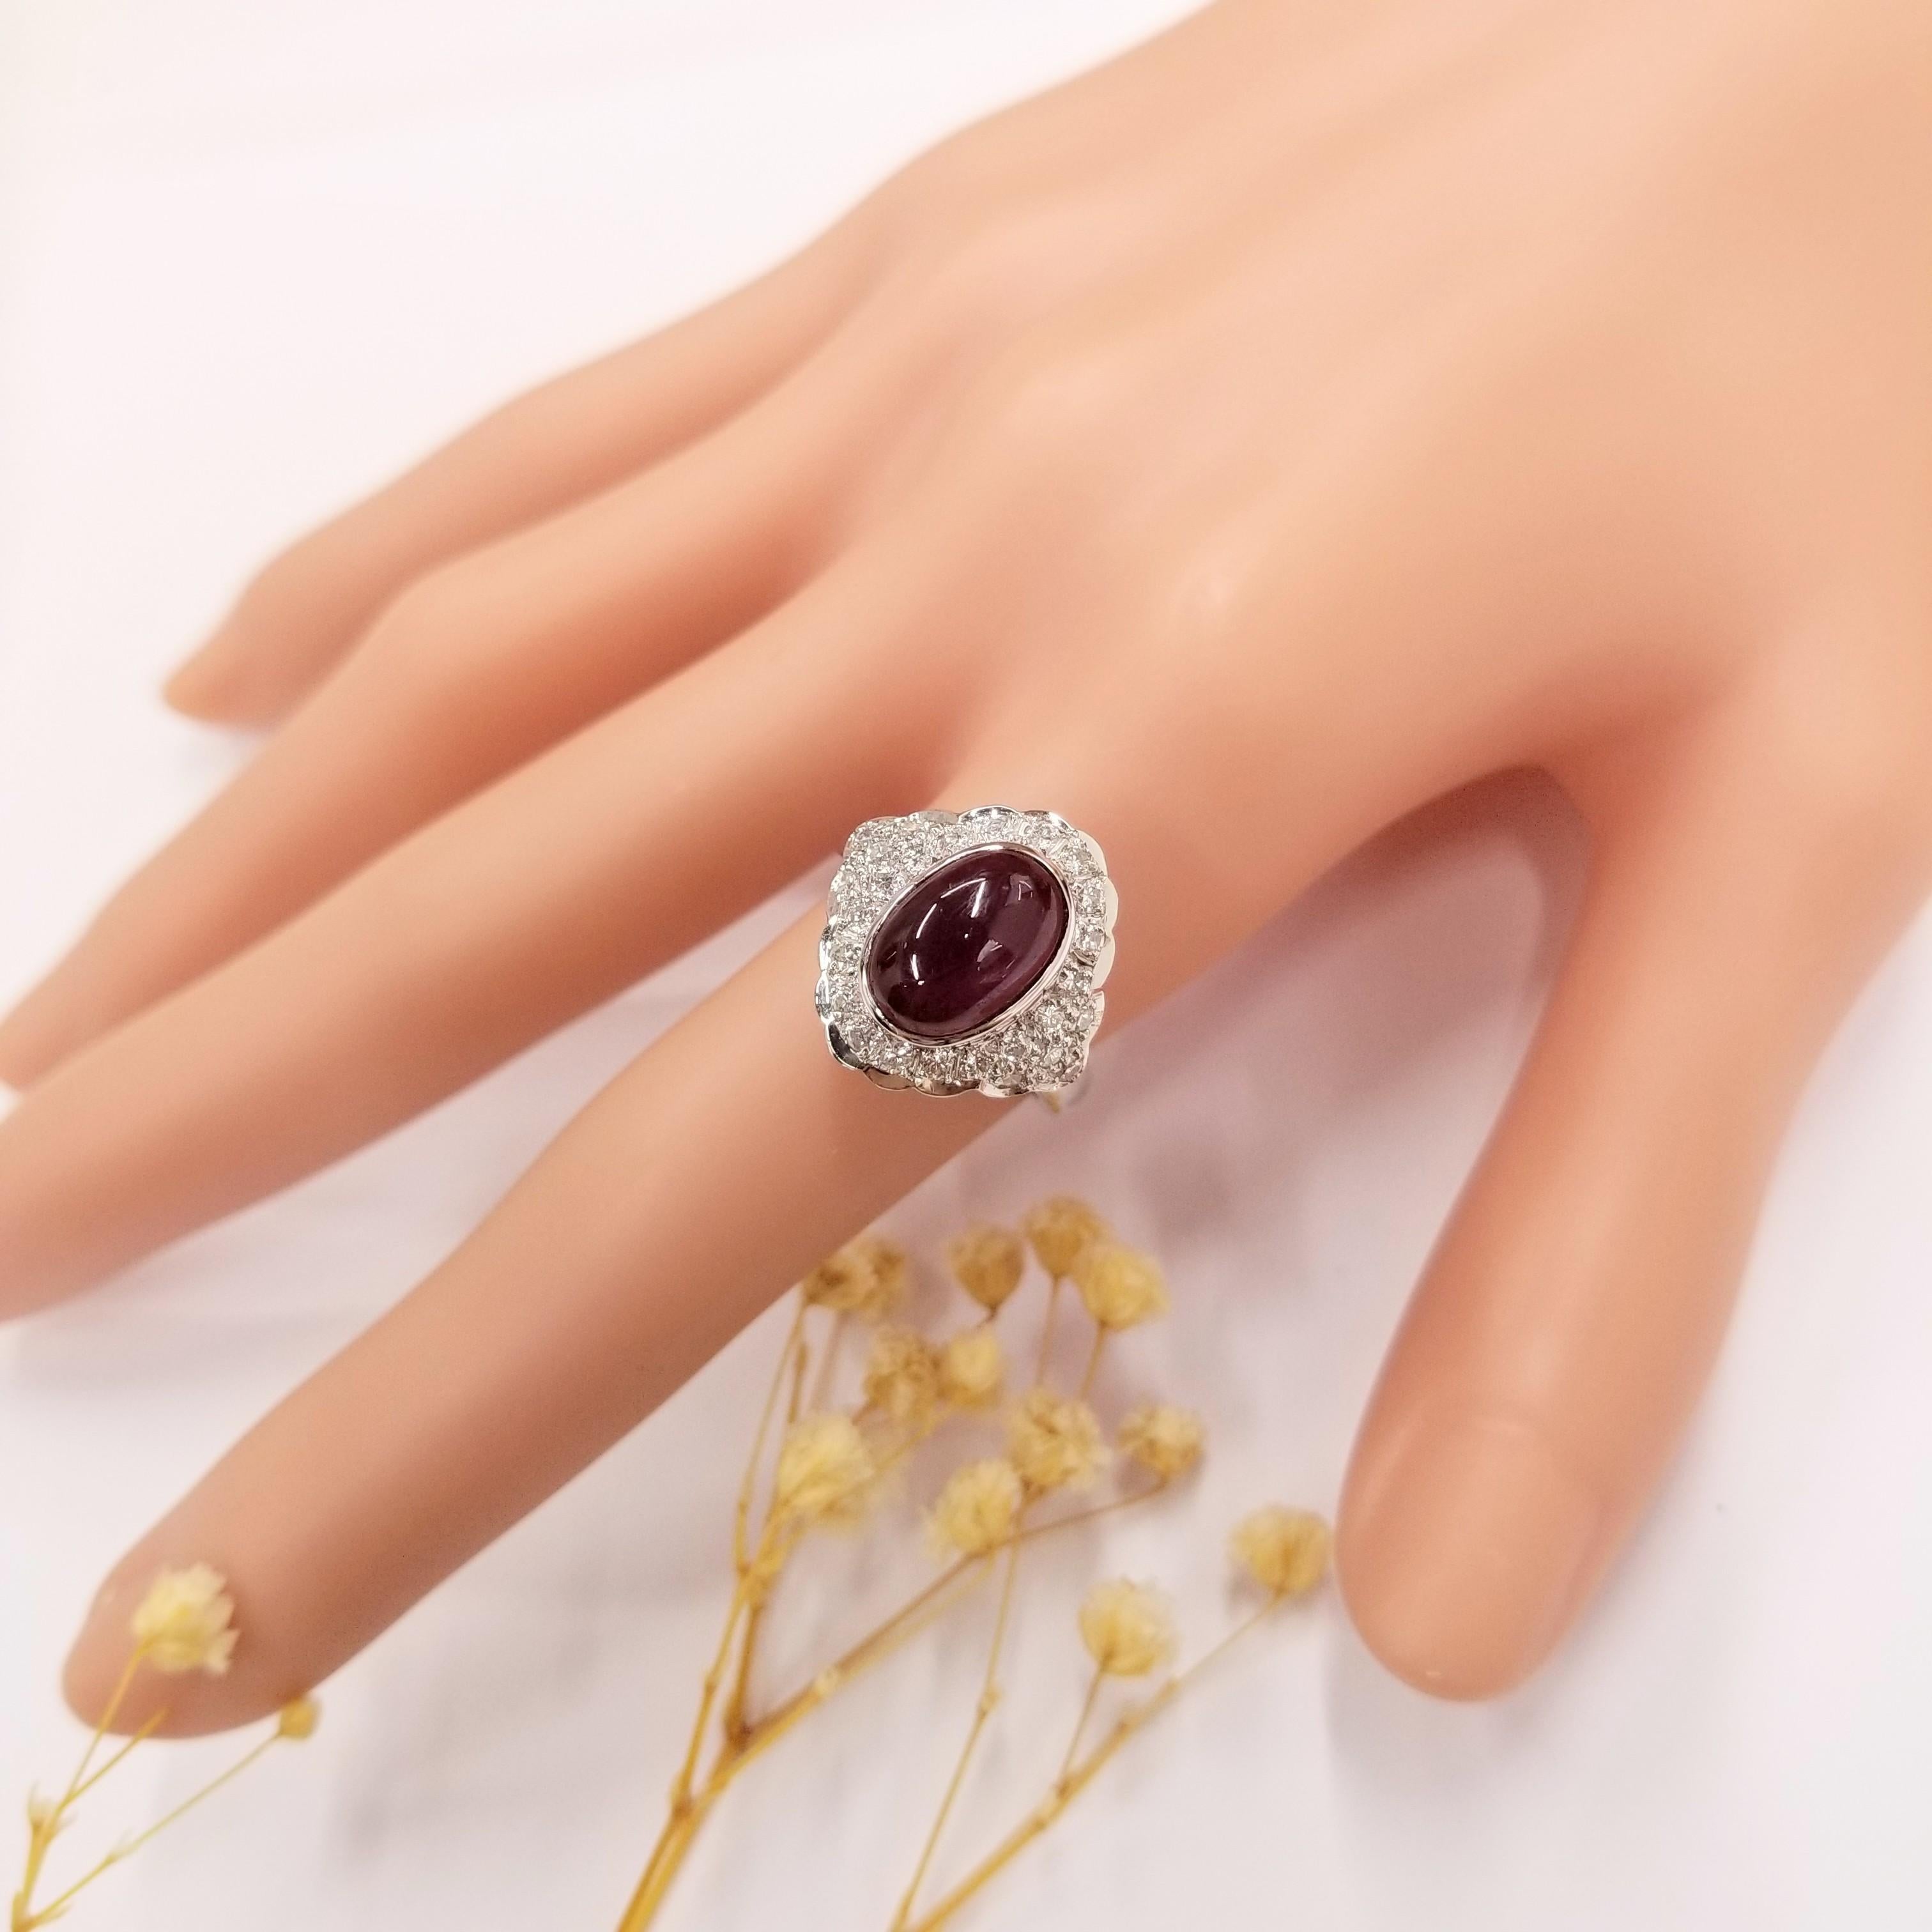 Immerse yourself in the enchanting world of vintage glamour and sophistication with this IGI Certified 3.30 Carat Cabochon Oval Ruby Ring. This exquisite piece showcases a magnificent deep purplish red ruby, certified by IGI, in a cabochon oval